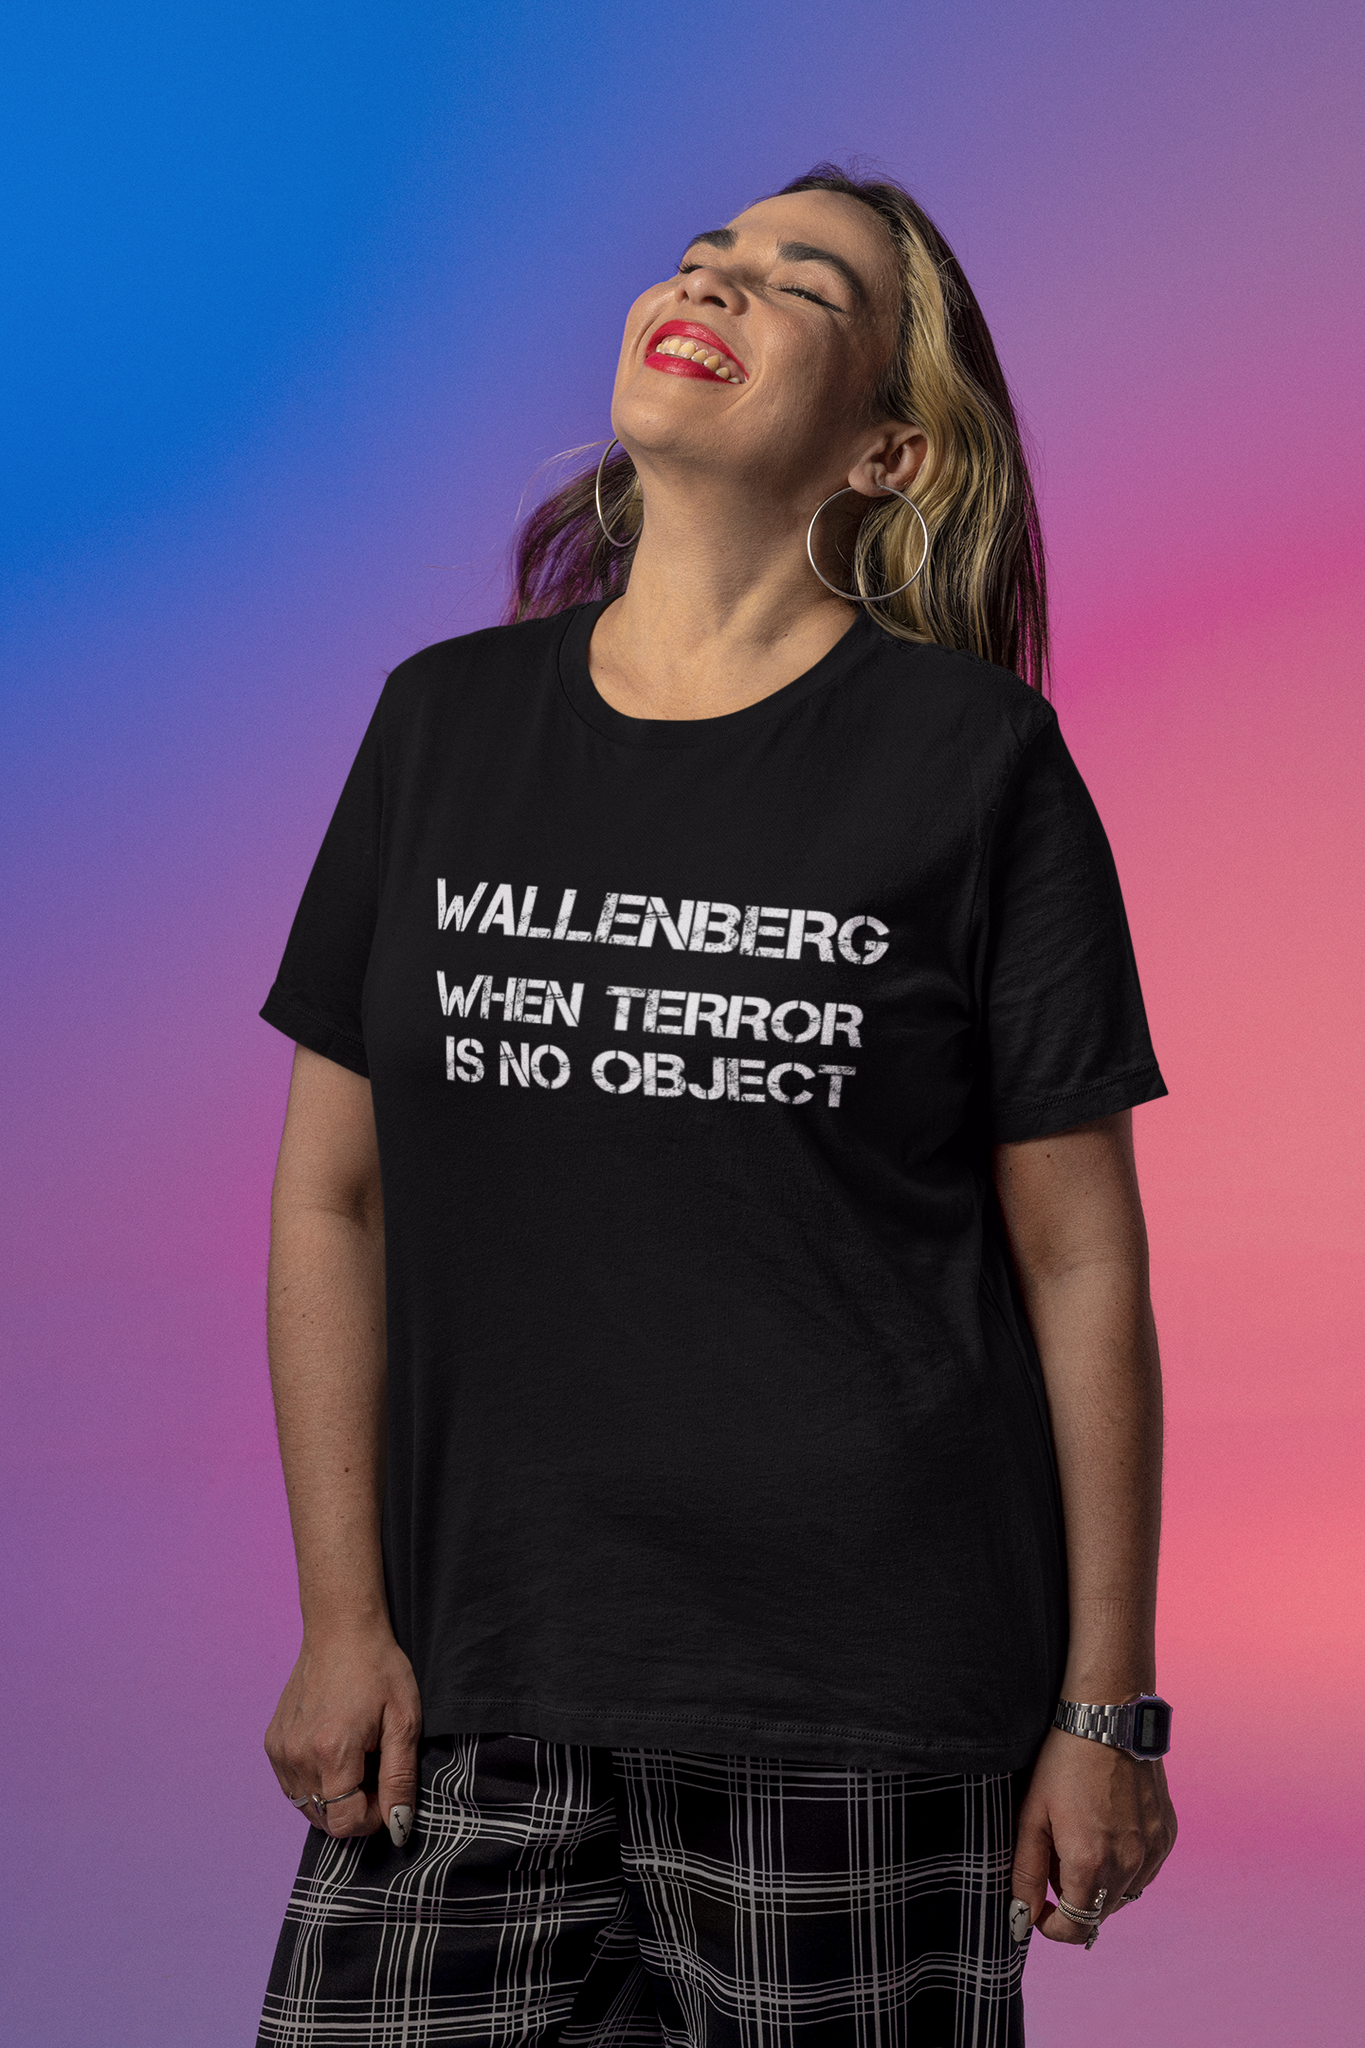 Wallenberg & Ericsson. When Terror is no object for making money